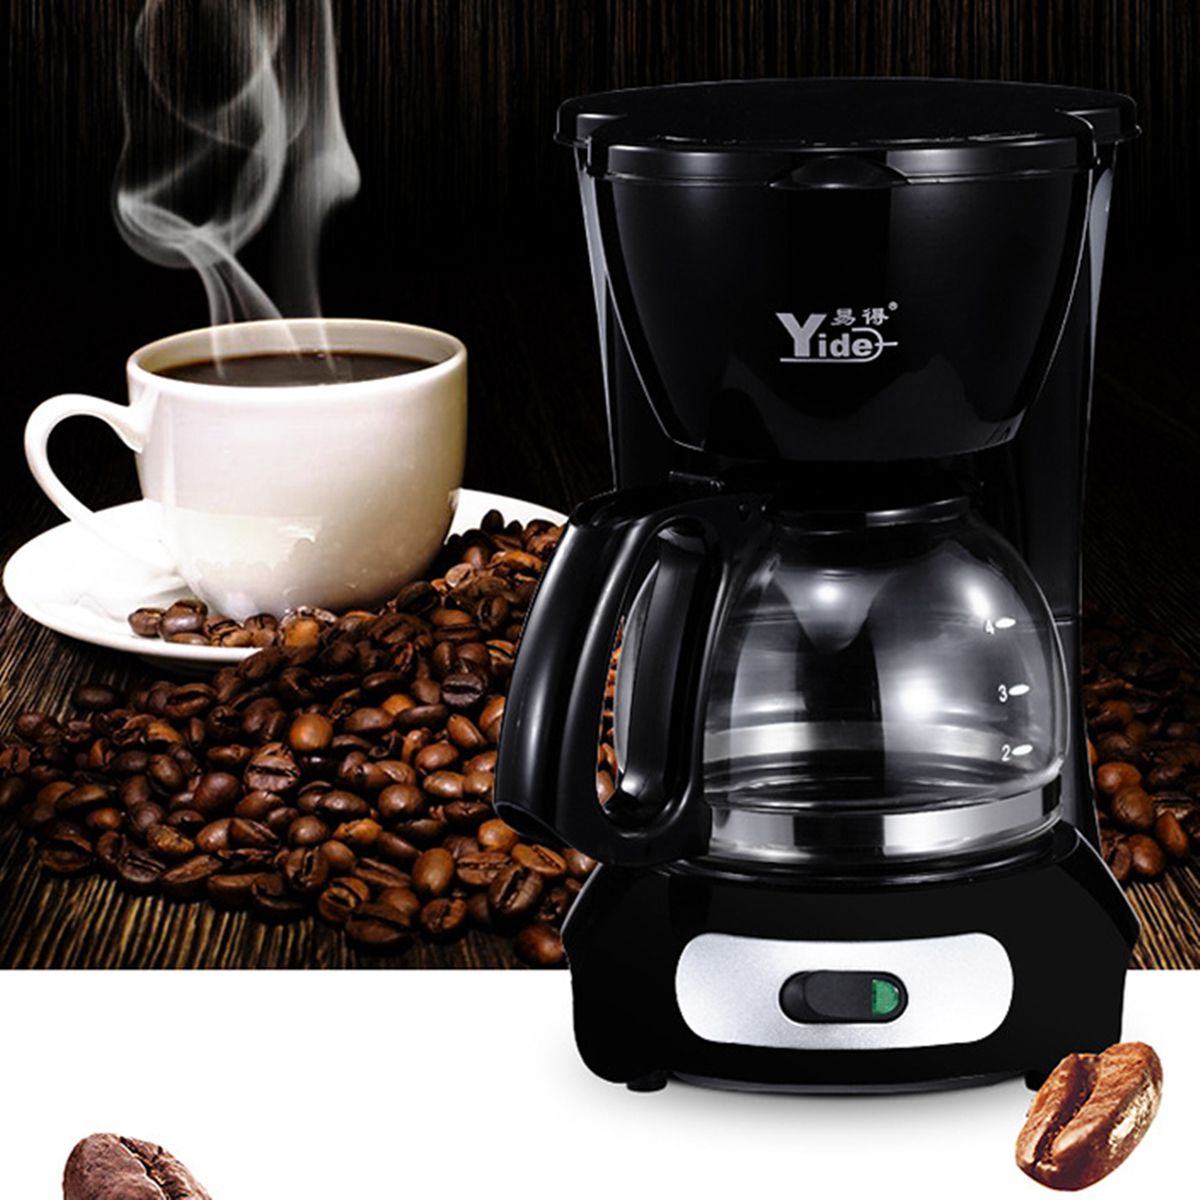 220V-Small-Drip-Commercial-American-Coffee-Machine-Automatic-Maker-Insulation-4-6-People-1450167